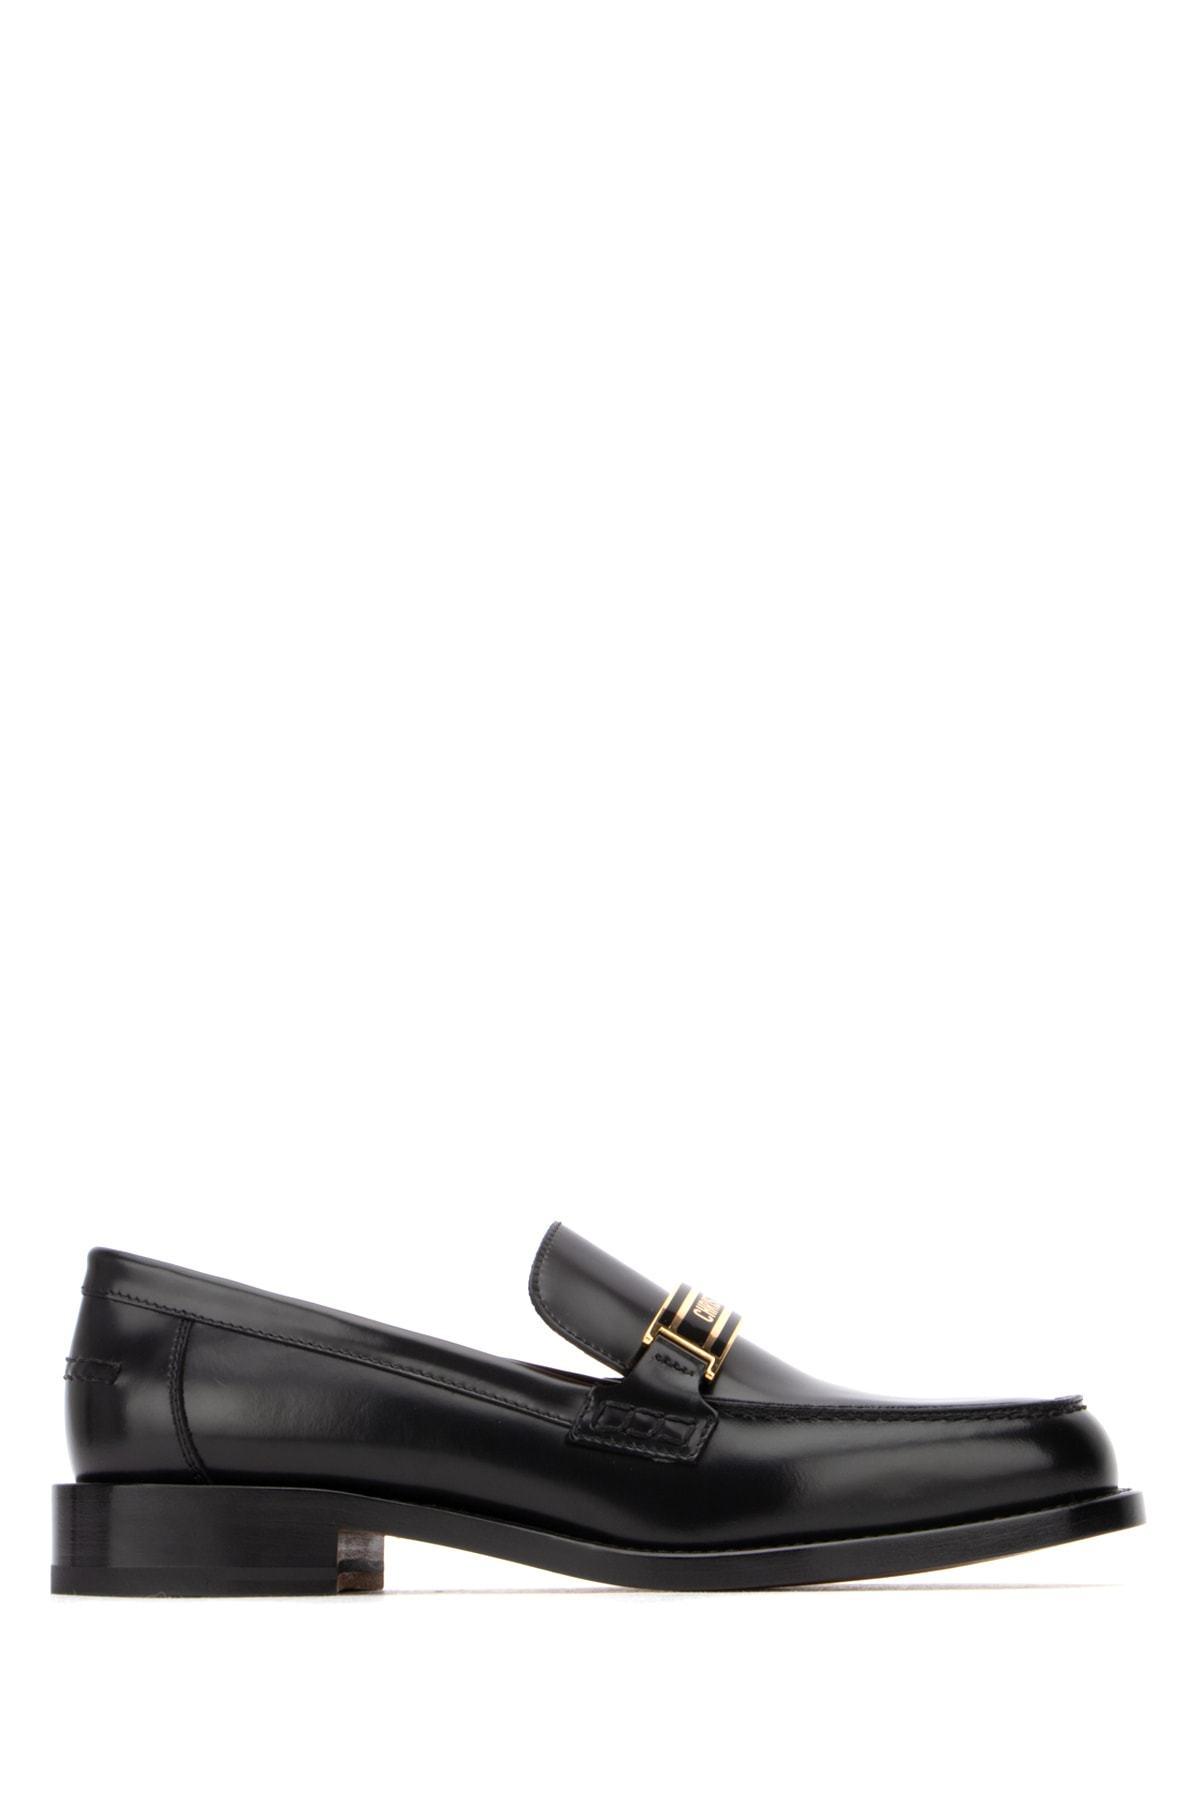 Dior Code Loafers in Black | Lyst